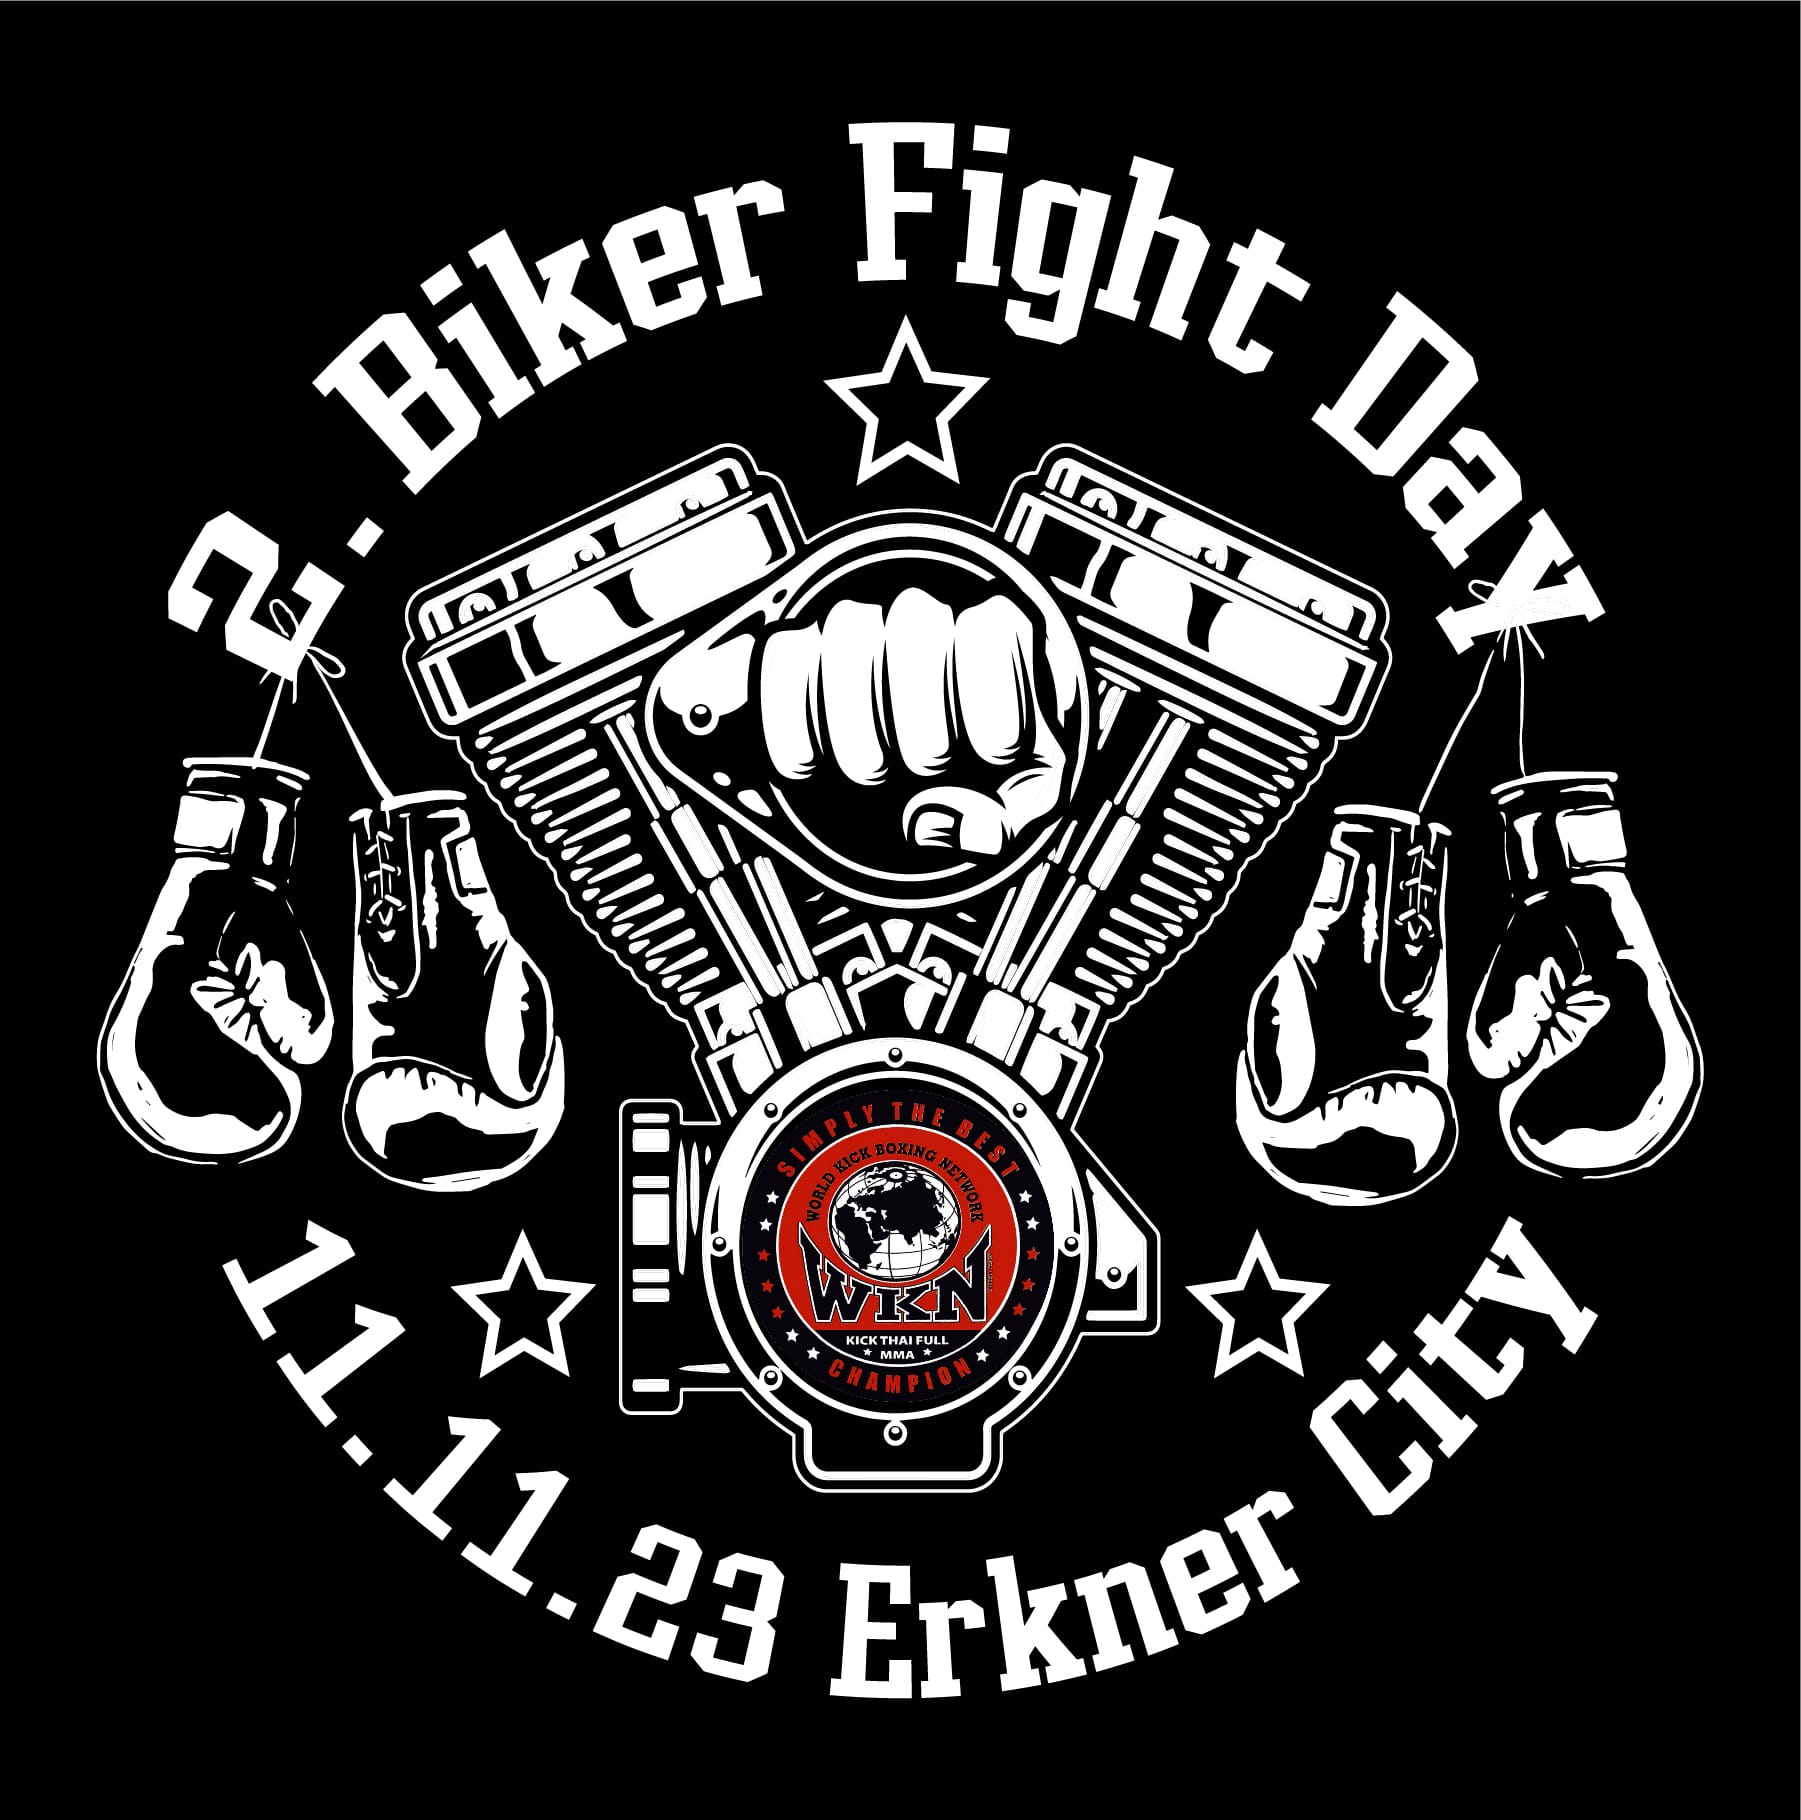 You are currently viewing 2. Biker Fight Day